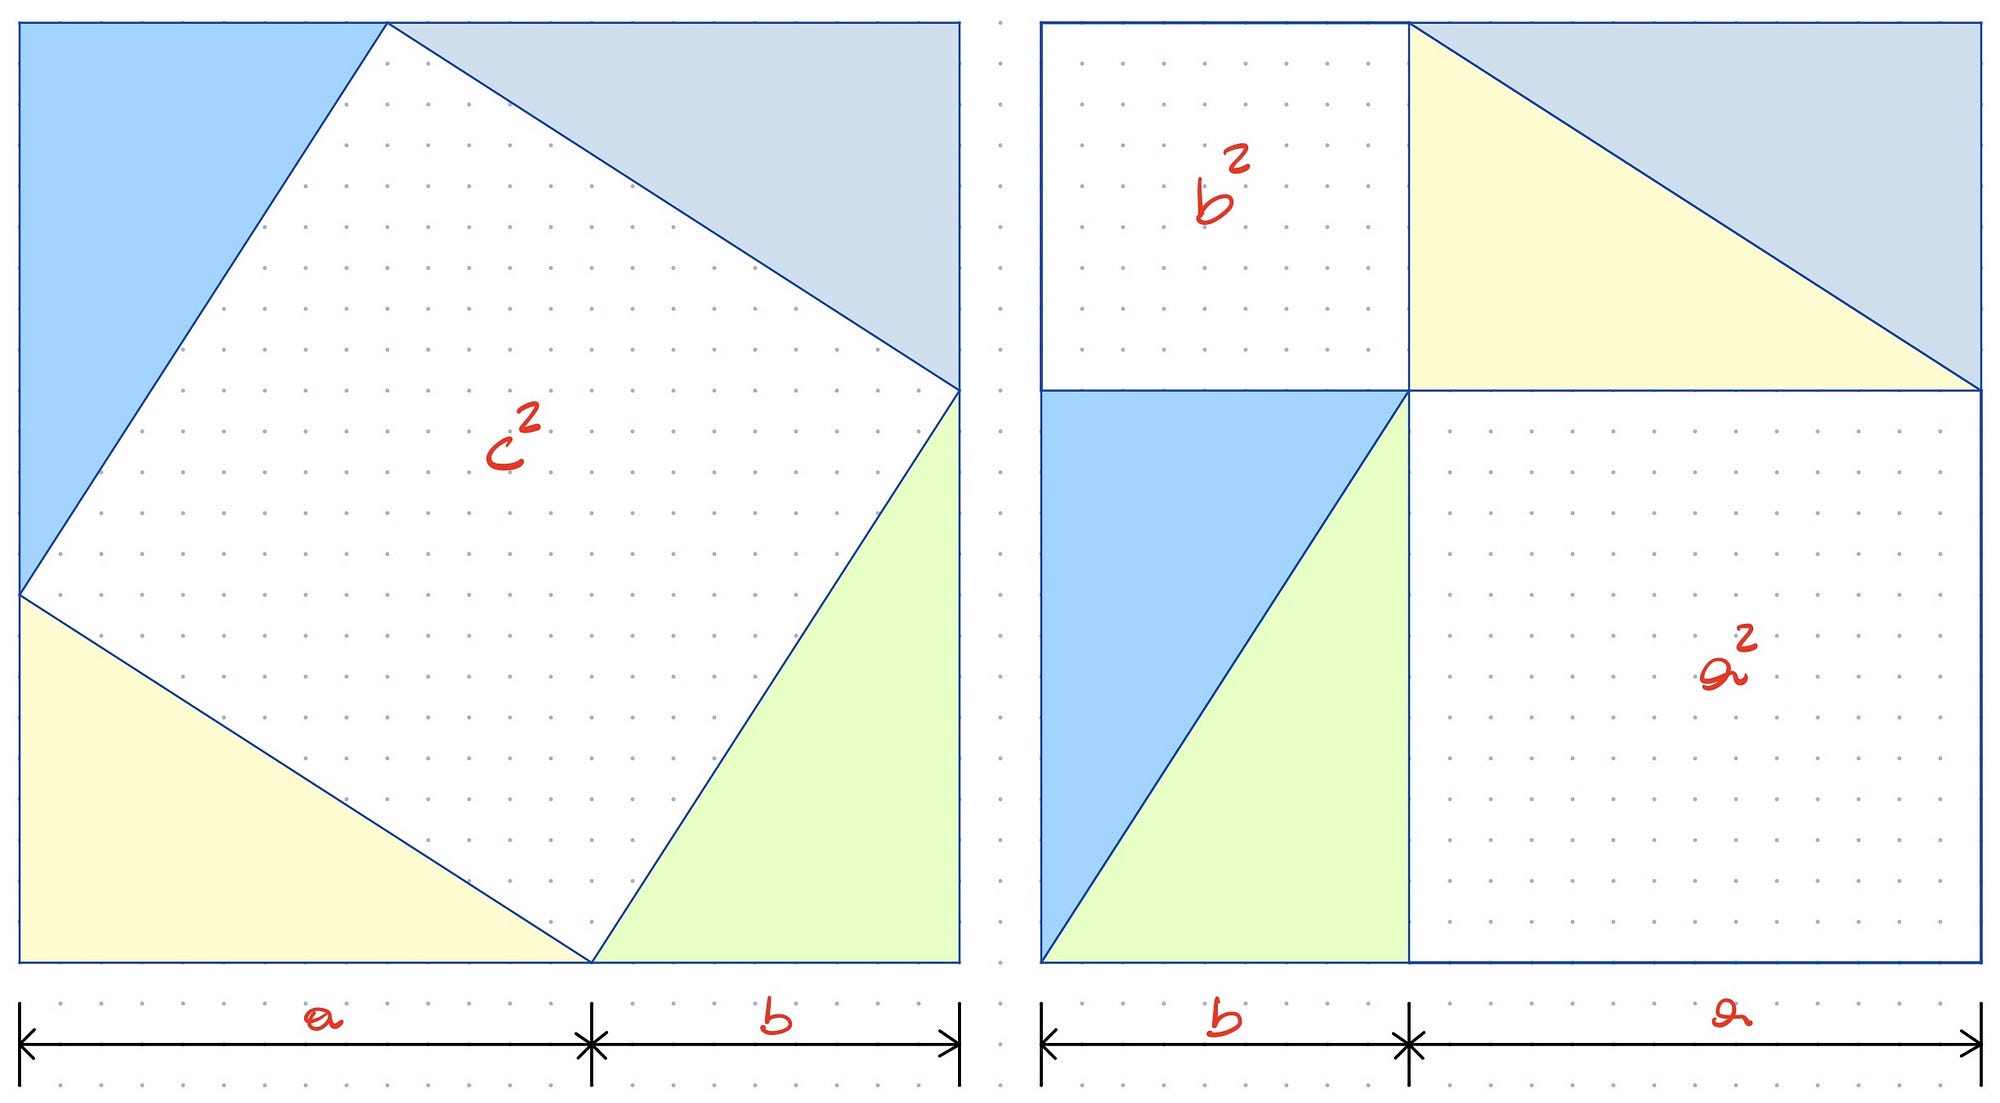 Proving the Pythagorean Theorem. Some algebraic and geometric proofs of…, by Michele Diodati, Not Zero